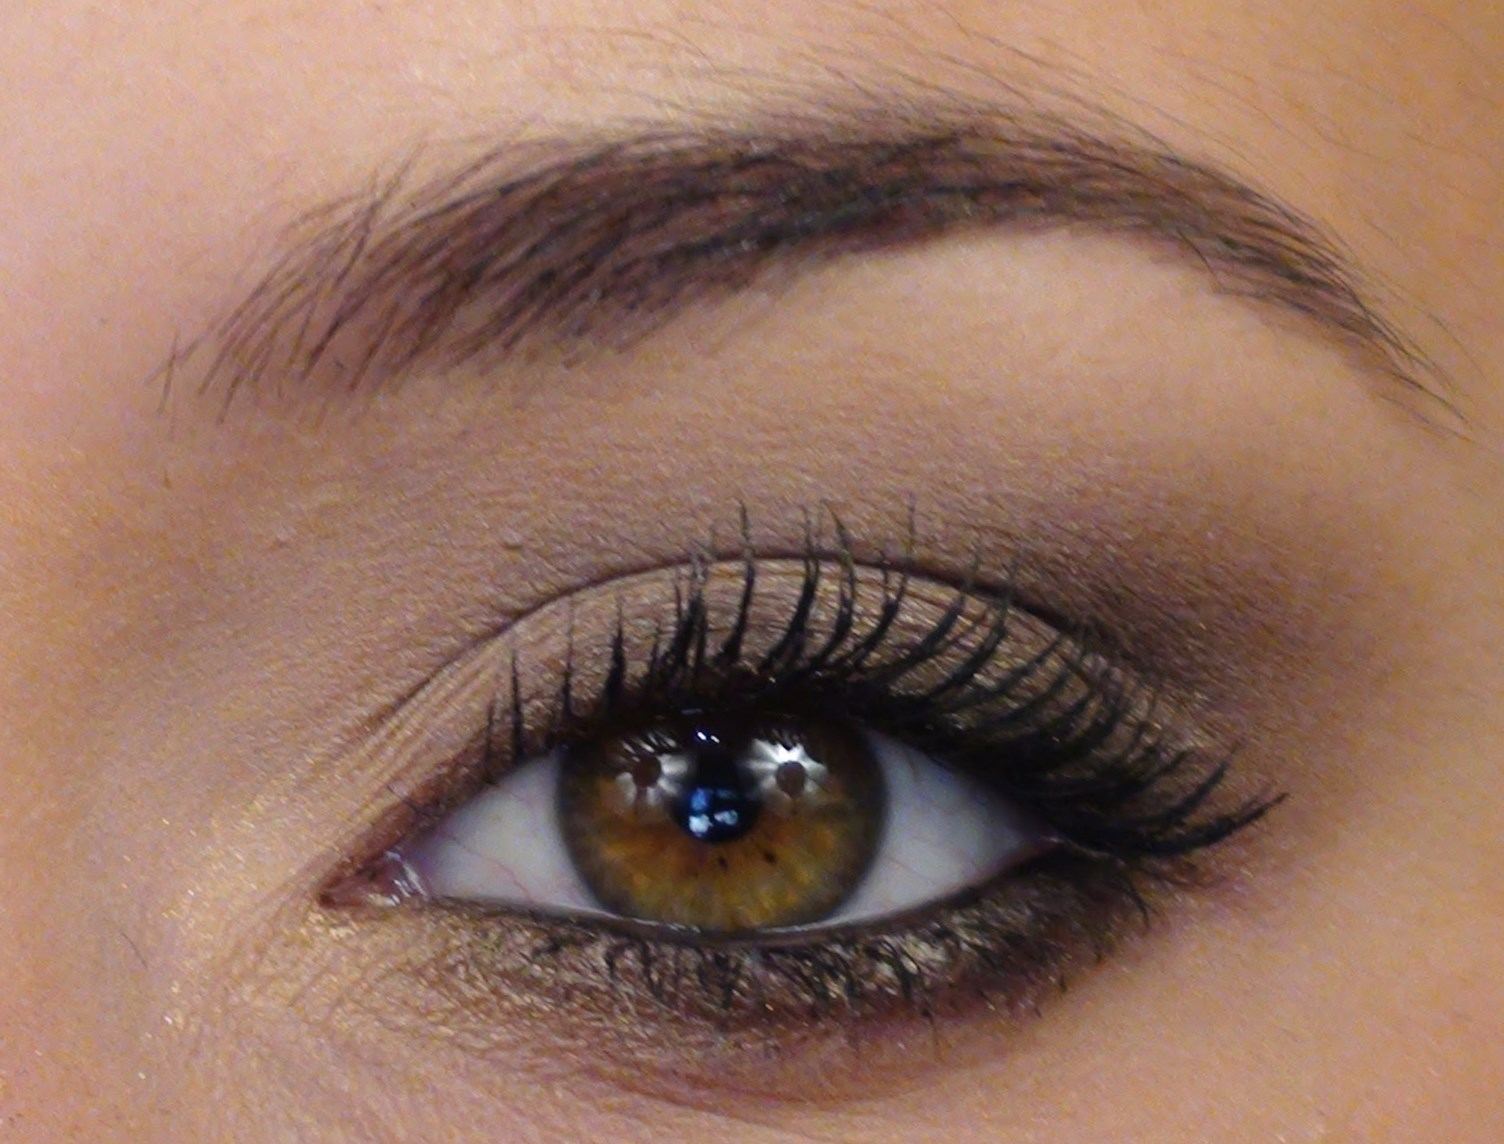 Maquillage Pour Les Yeux - www.inf-inet.com